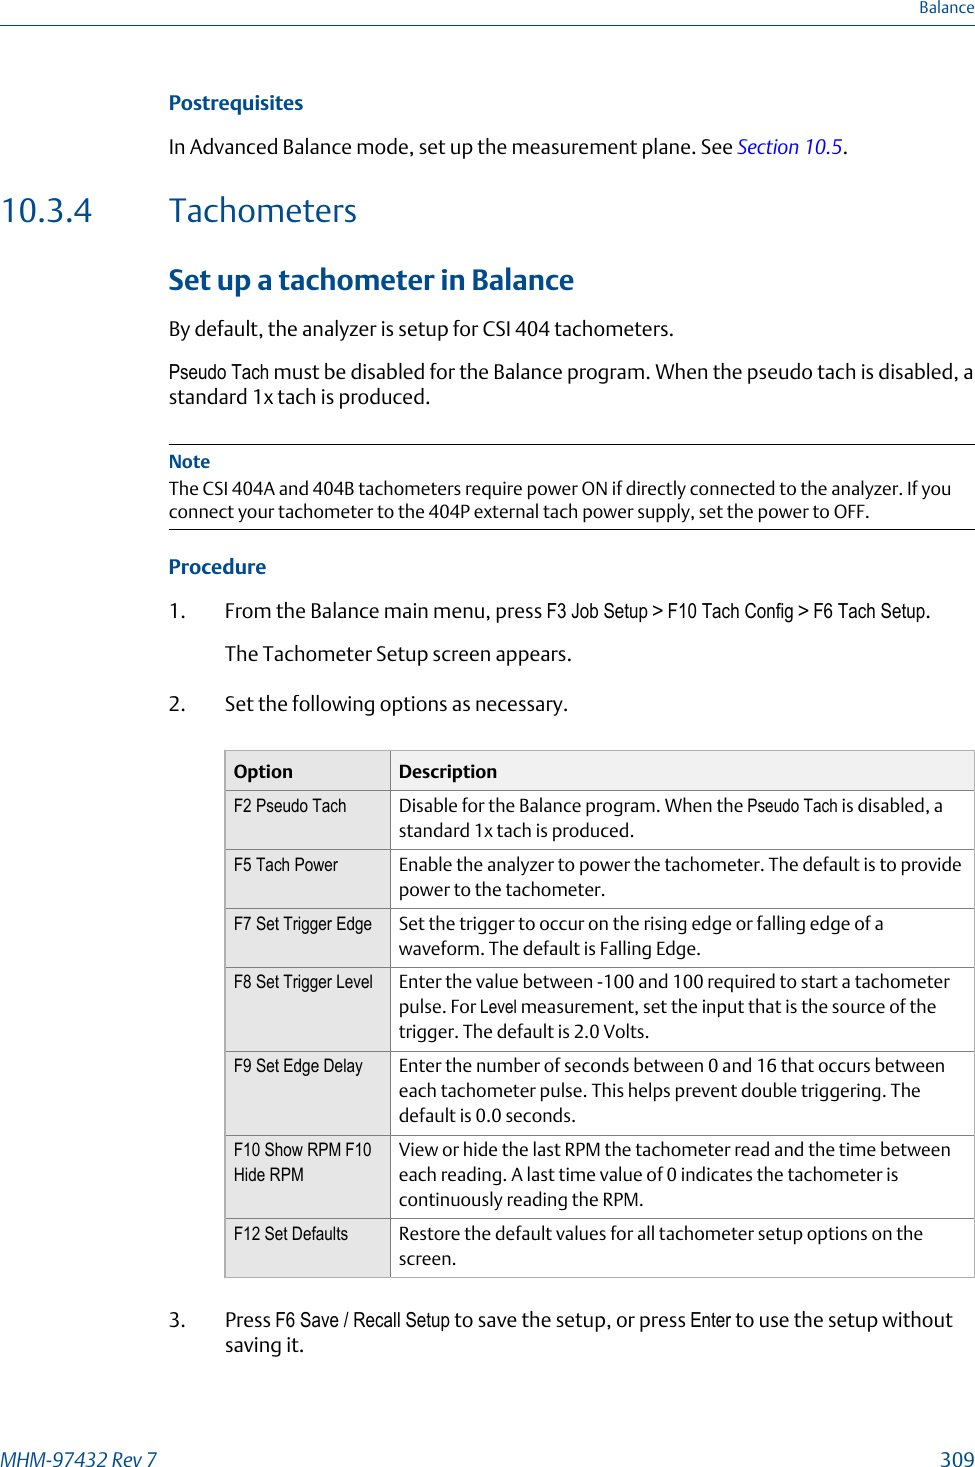 PostrequisitesIn Advanced Balance mode, set up the measurement plane. See Section 10.5.10.3.4 TachometersSet up a tachometer in BalanceBy default, the analyzer is setup for CSI 404 tachometers.Pseudo Tach must be disabled for the Balance program. When the pseudo tach is disabled, astandard 1x tach is produced.NoteThe CSI 404A and 404B tachometers require power ON if directly connected to the analyzer. If youconnect your tachometer to the 404P external tach power supply, set the power to OFF.Procedure1. From the Balance main menu, press F3 Job Setup &gt; F10 Tach Config &gt; F6 Tach Setup.The Tachometer Setup screen appears.2. Set the following options as necessary.Option DescriptionF2 Pseudo Tach Disable for the Balance program. When the Pseudo Tach is disabled, astandard 1x tach is produced.F5 Tach Power Enable the analyzer to power the tachometer. The default is to providepower to the tachometer.F7 Set Trigger Edge Set the trigger to occur on the rising edge or falling edge of awaveform. The default is Falling Edge.F8 Set Trigger Level Enter the value between -100 and 100 required to start a tachometerpulse. For Level measurement, set the input that is the source of thetrigger. The default is 2.0 Volts.F9 Set Edge Delay Enter the number of seconds between 0 and 16 that occurs betweeneach tachometer pulse. This helps prevent double triggering. Thedefault is 0.0 seconds.F10 Show RPM F10Hide RPMView or hide the last RPM the tachometer read and the time betweeneach reading. A last time value of 0 indicates the tachometer iscontinuously reading the RPM.F12 Set Defaults Restore the default values for all tachometer setup options on thescreen.3. Press F6 Save / Recall Setup to save the setup, or press Enter to use the setup withoutsaving it.BalanceMHM-97432 Rev 7  309